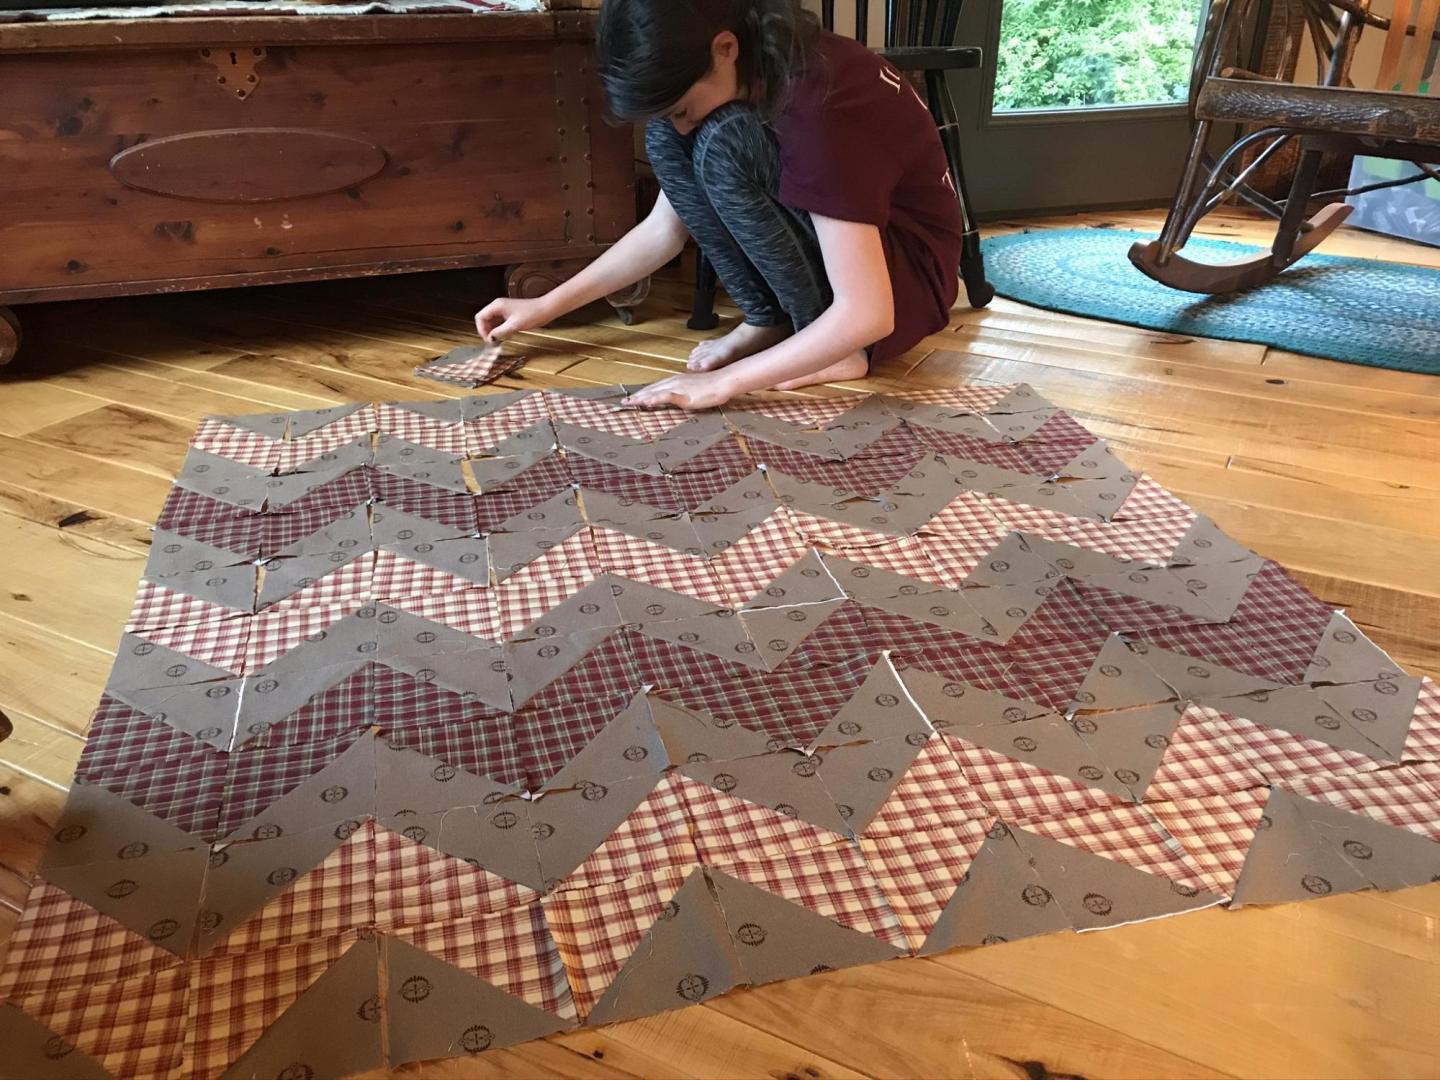 A young girl piecing together a quilt